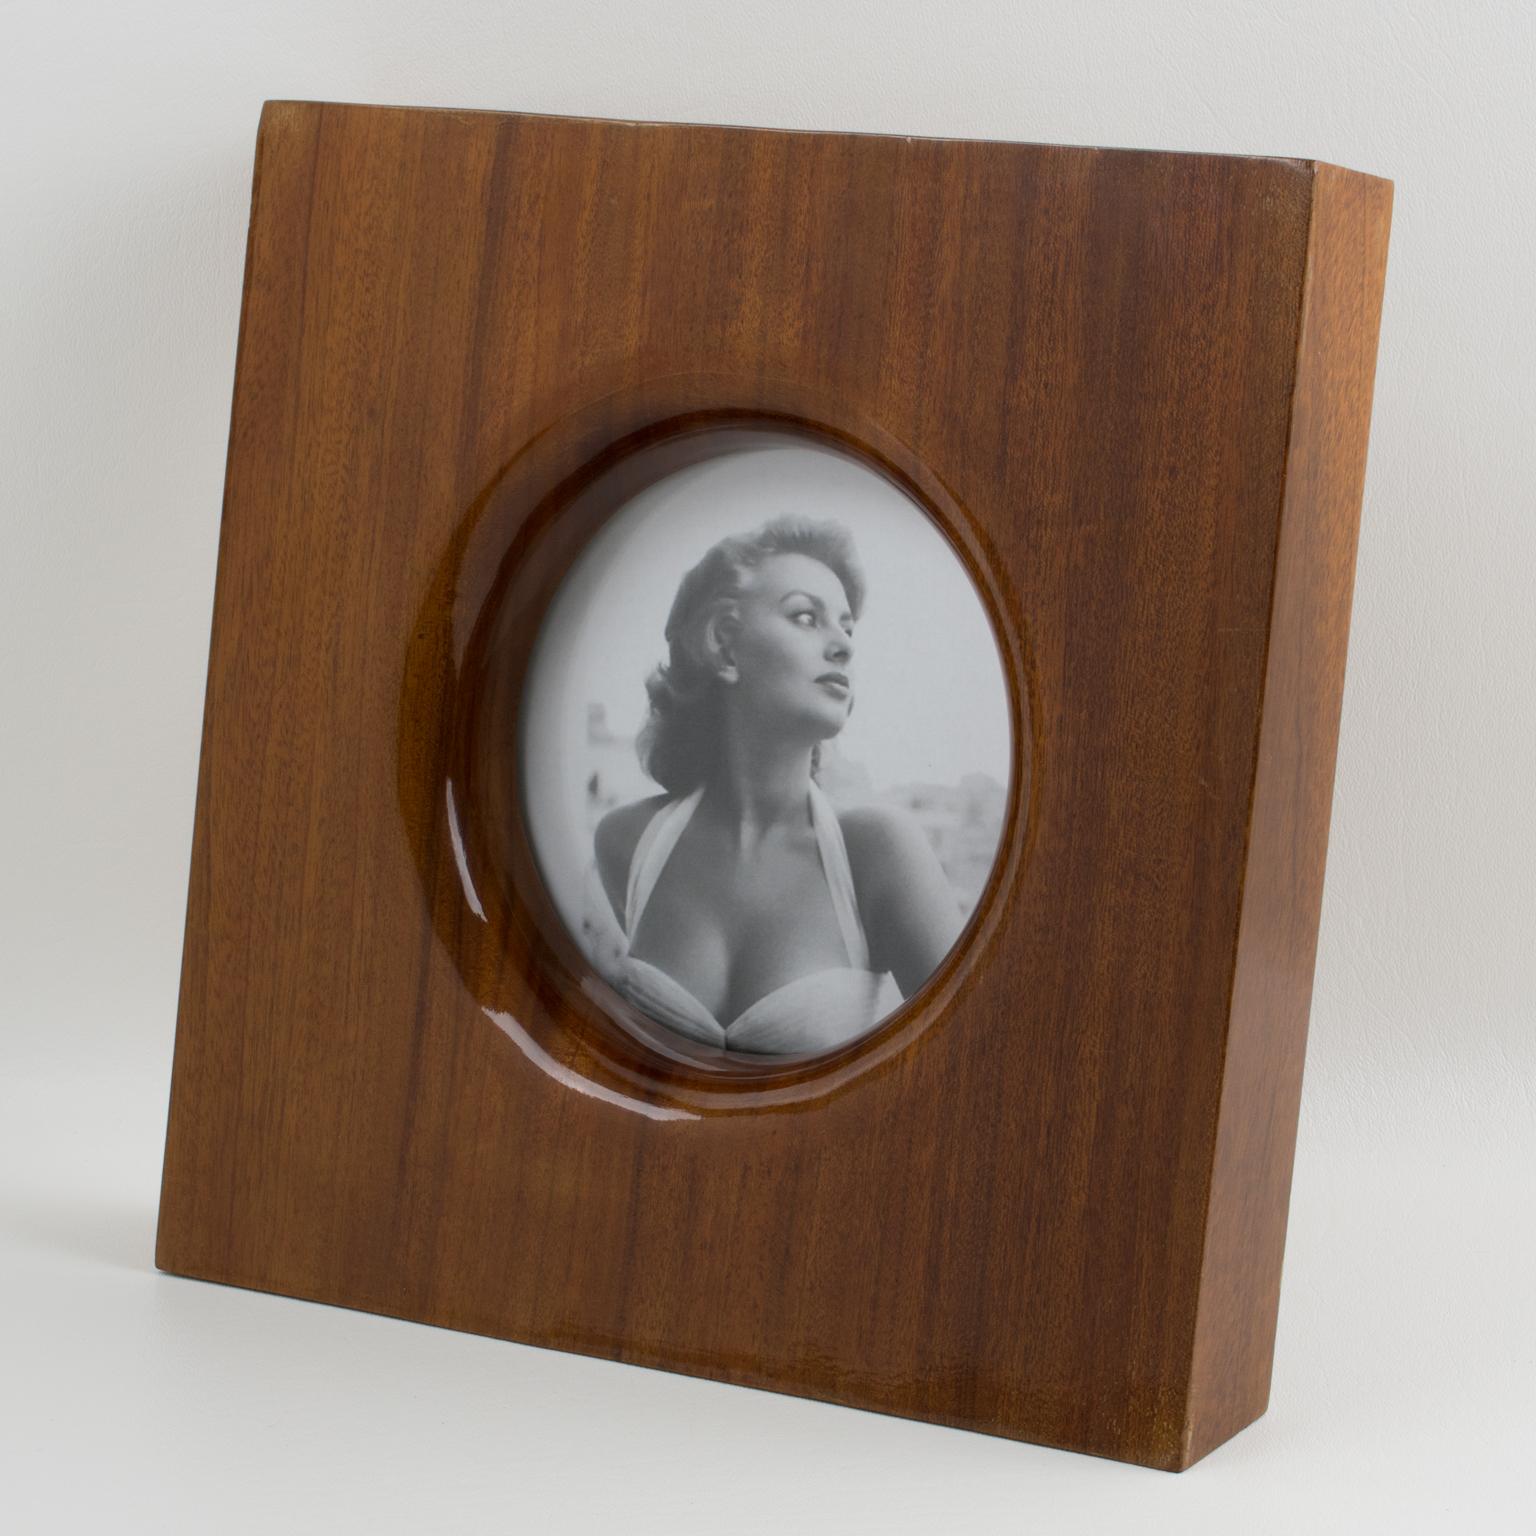 Emanuele Pantanella (1939-2014), Italy, designed this sumptuous picture photo frame. Solid tropical wood with a high gloss polished finish in a minimalist geometric shape. Emanuele Pantanella designs are modern-day Objects of Vertu, an extreme